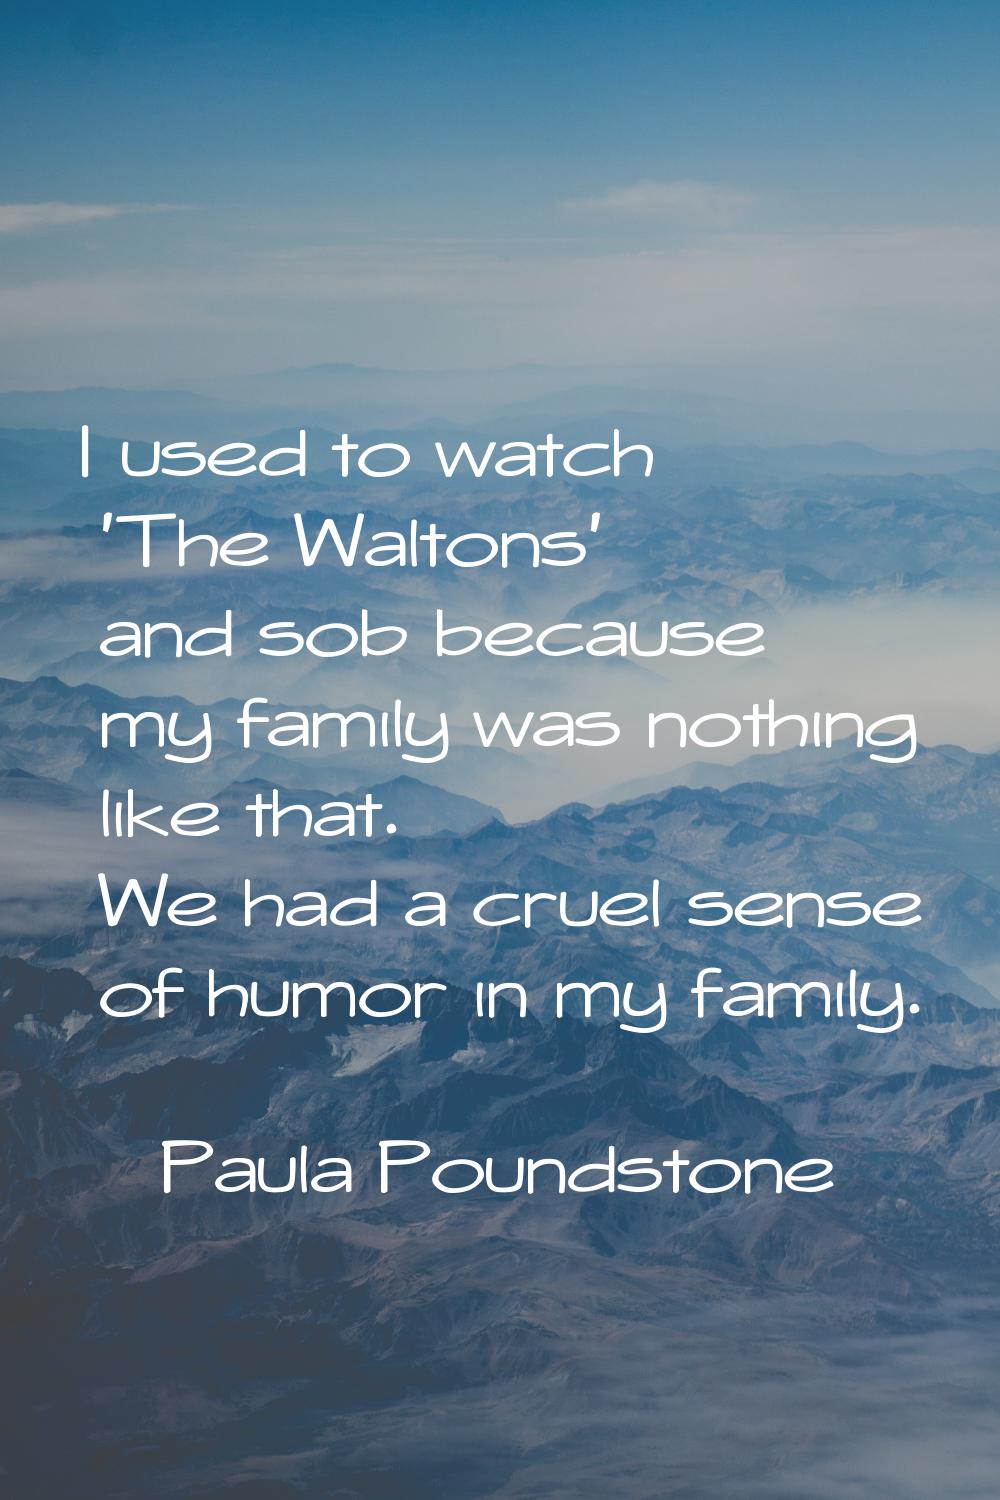 I used to watch 'The Waltons' and sob because my family was nothing like that. We had a cruel sense